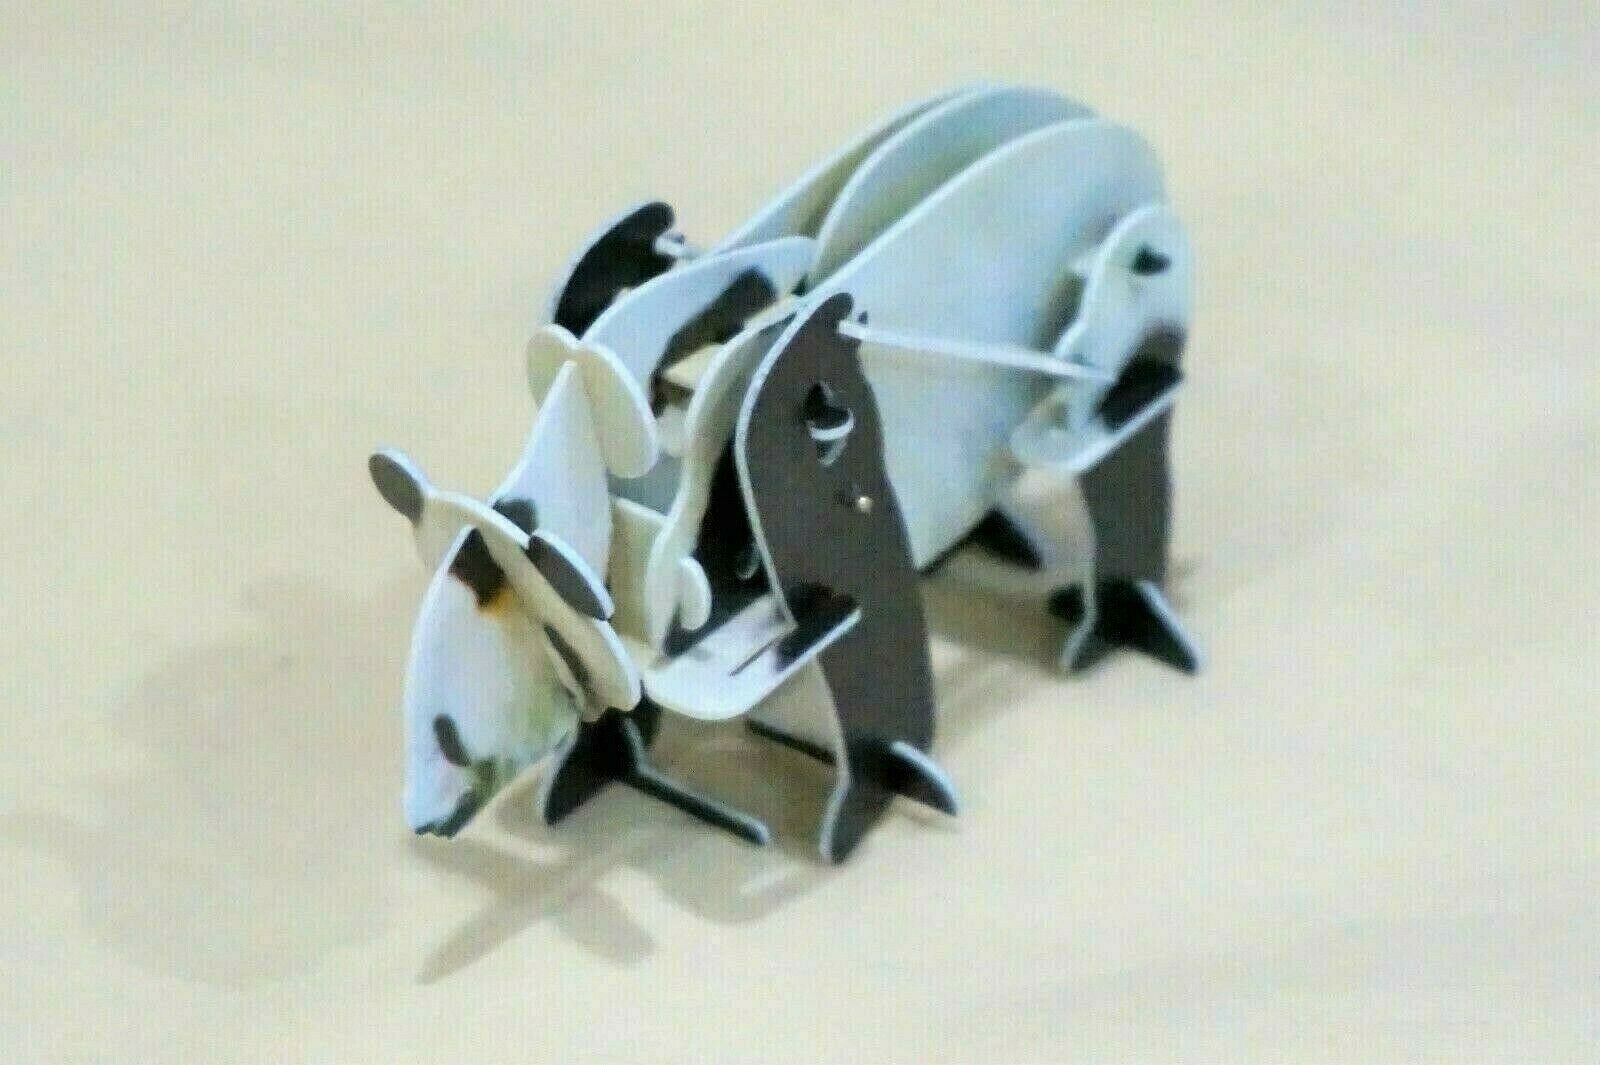 New Wind Up Moving 3D Puzzles Walking Panda 3 No Tool Imported from Japan